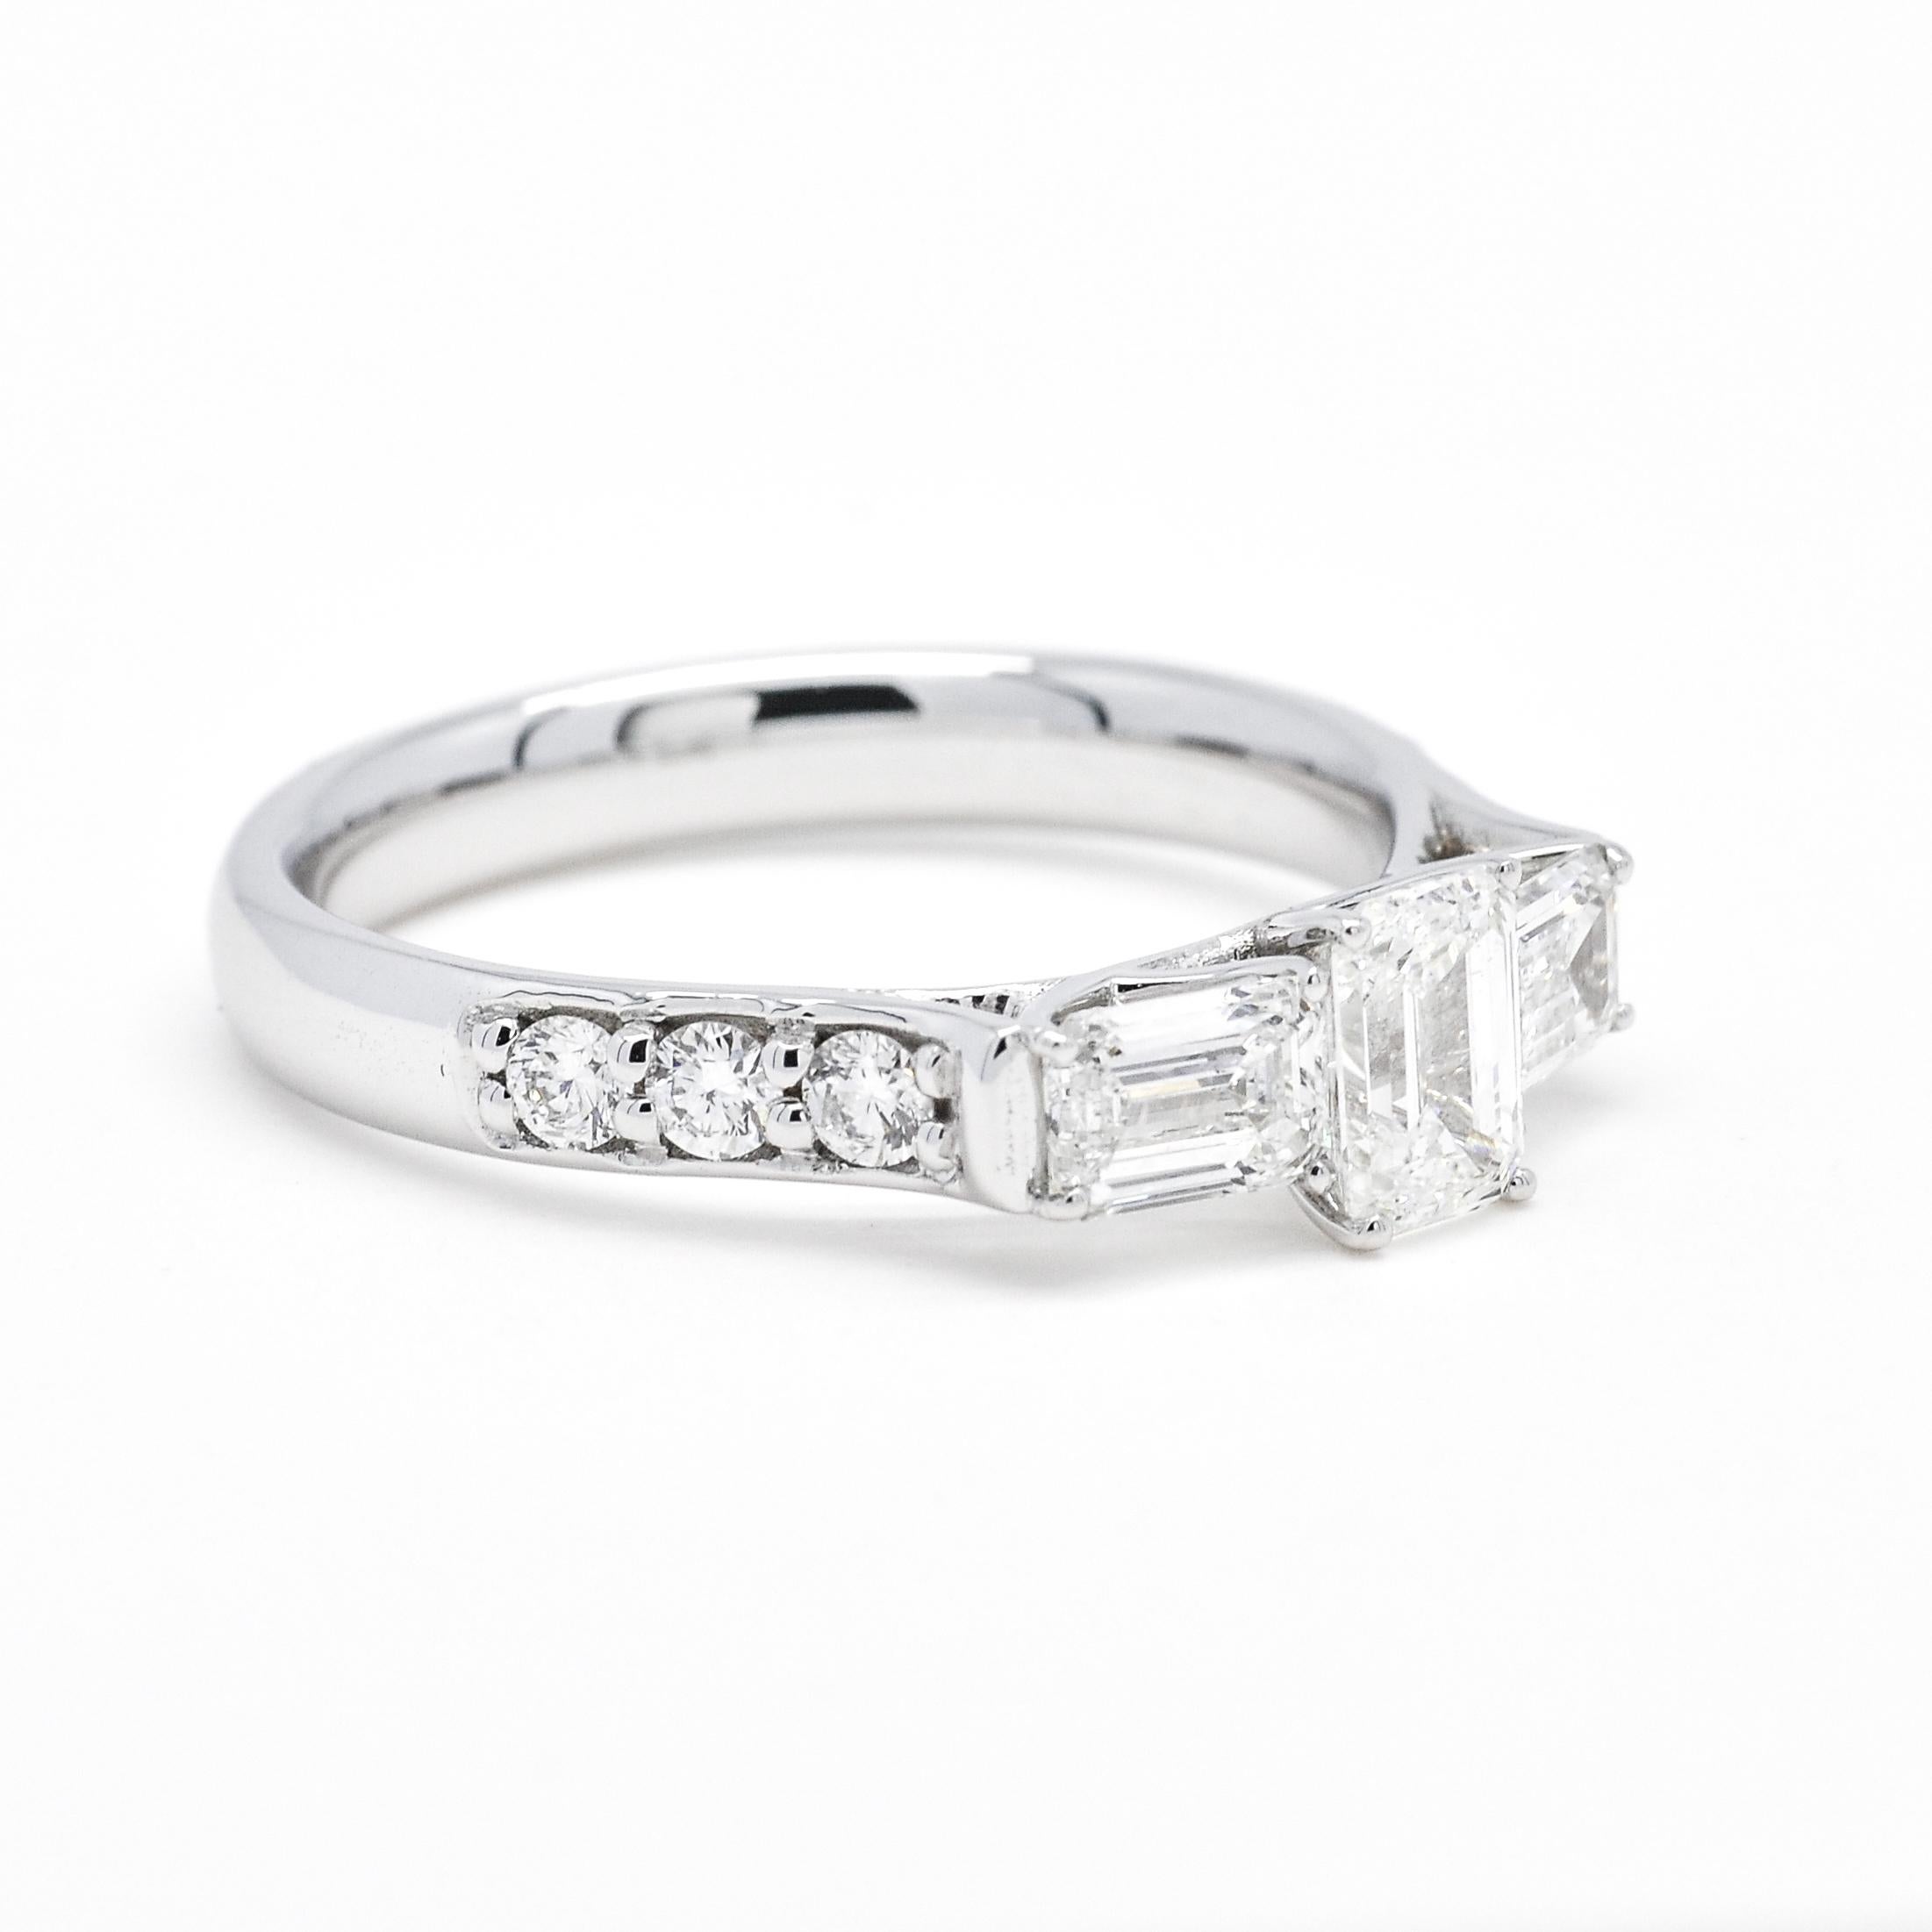 A trio of emerald-cut diamonds radiates a clear and magnificent shine on this stunning engagement ring set with sparkling accent diamonds along the White gold shank.

Elegance re-imagined. A shimmering trio of emerald-cut diamonds are the beautiful